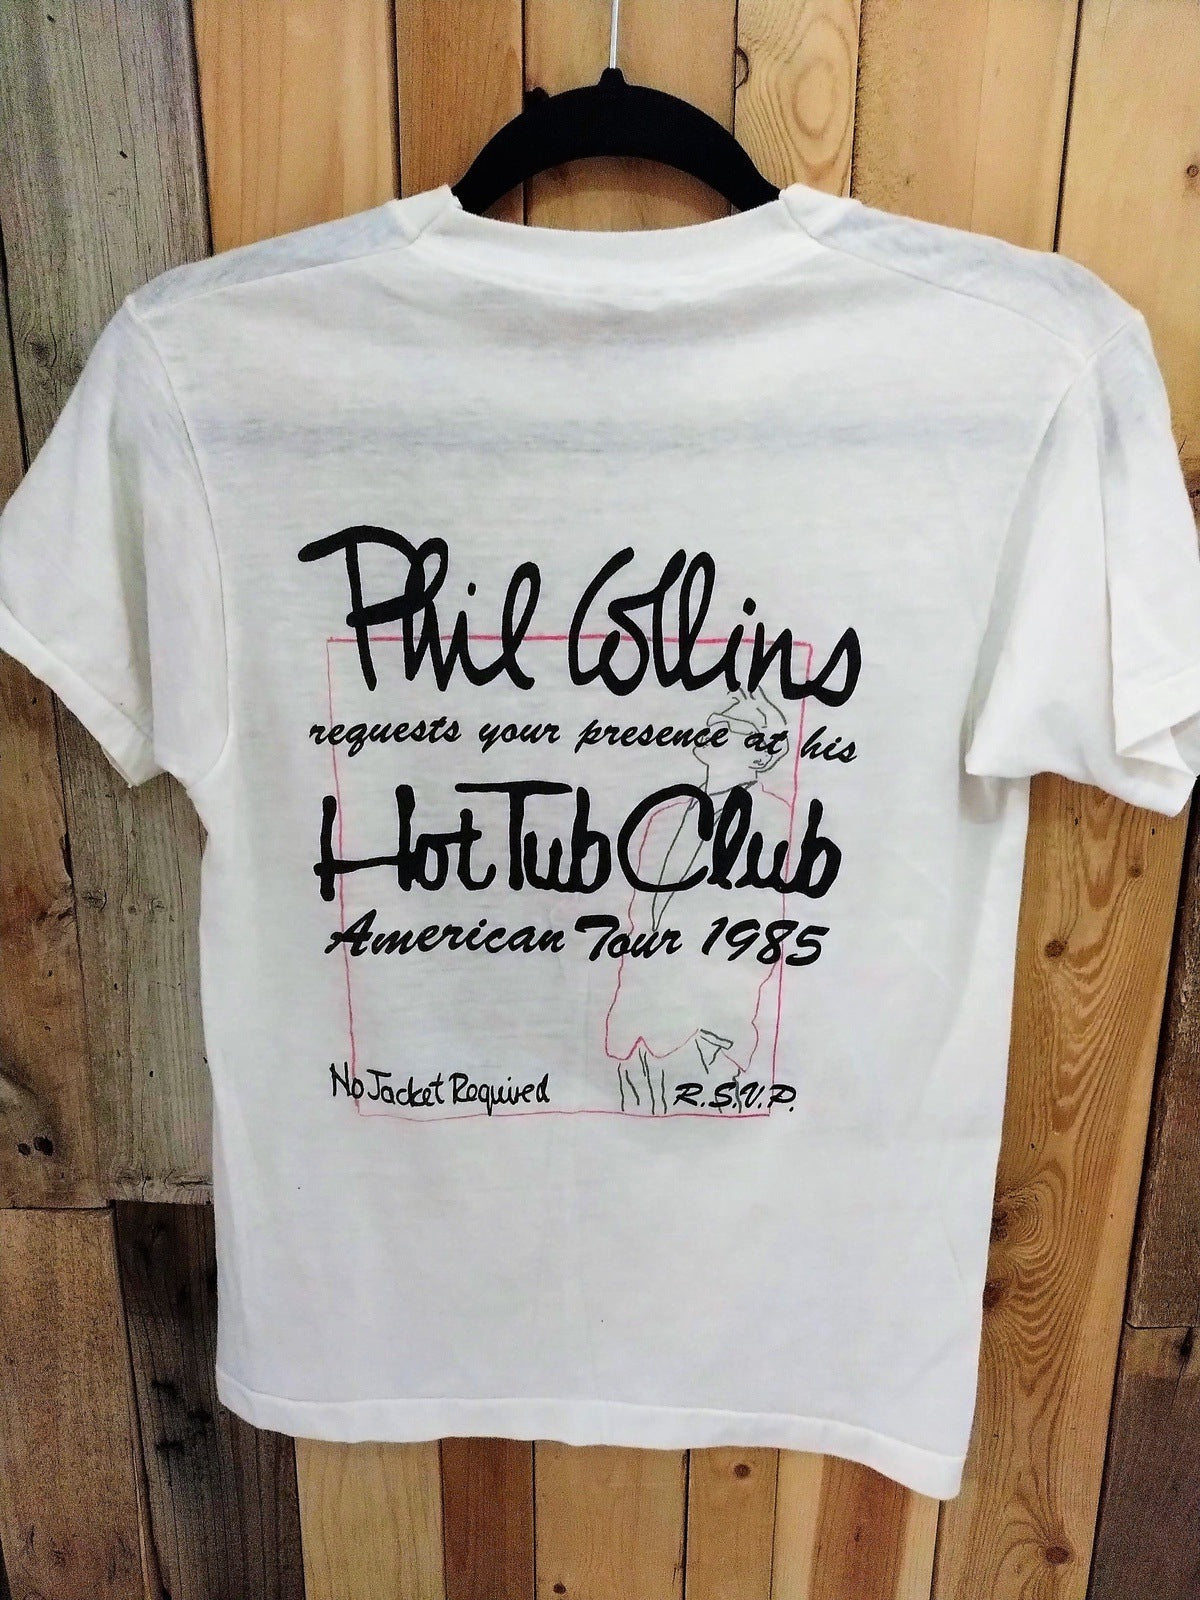 Phil Collins "No Jacket Required" 1985 Original Tour T Shirt Size Small 624713DQ